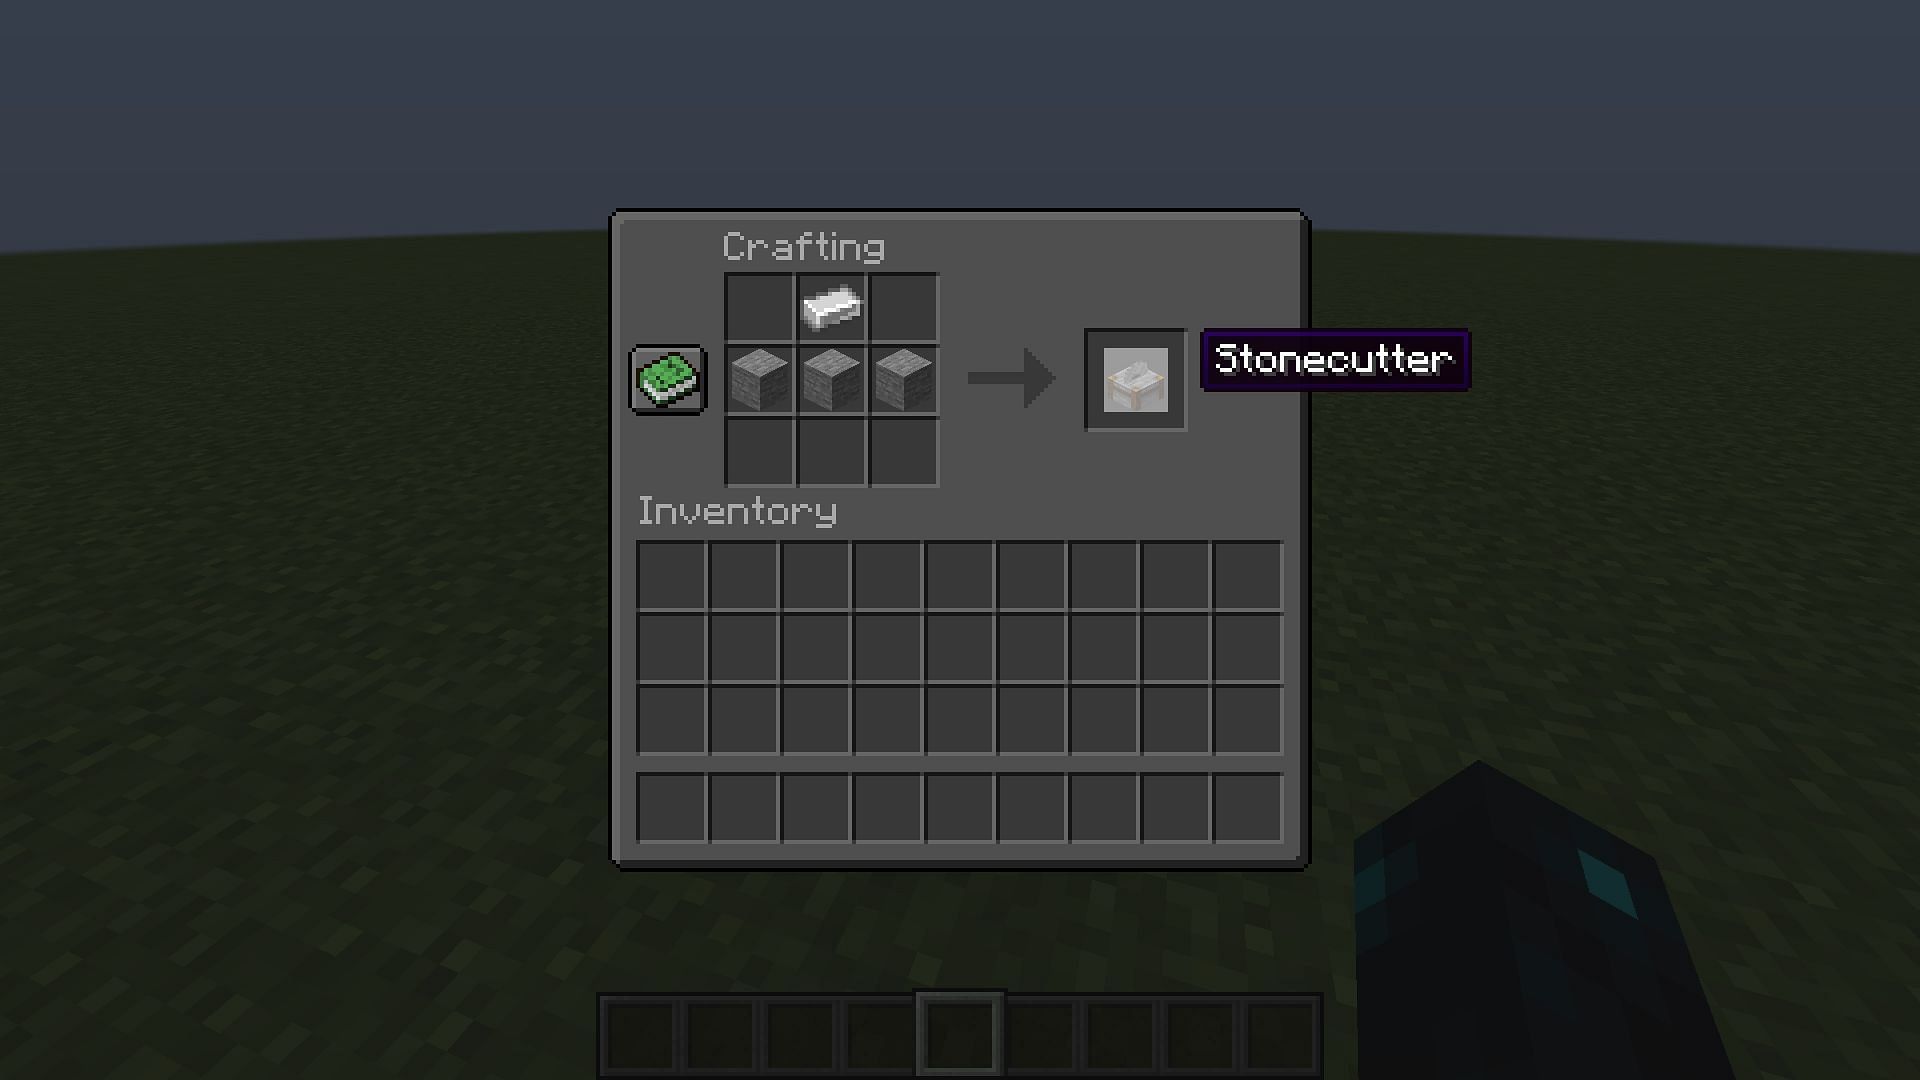 The stonecutter crafting recipe in Minecraft (Image via Mojang)